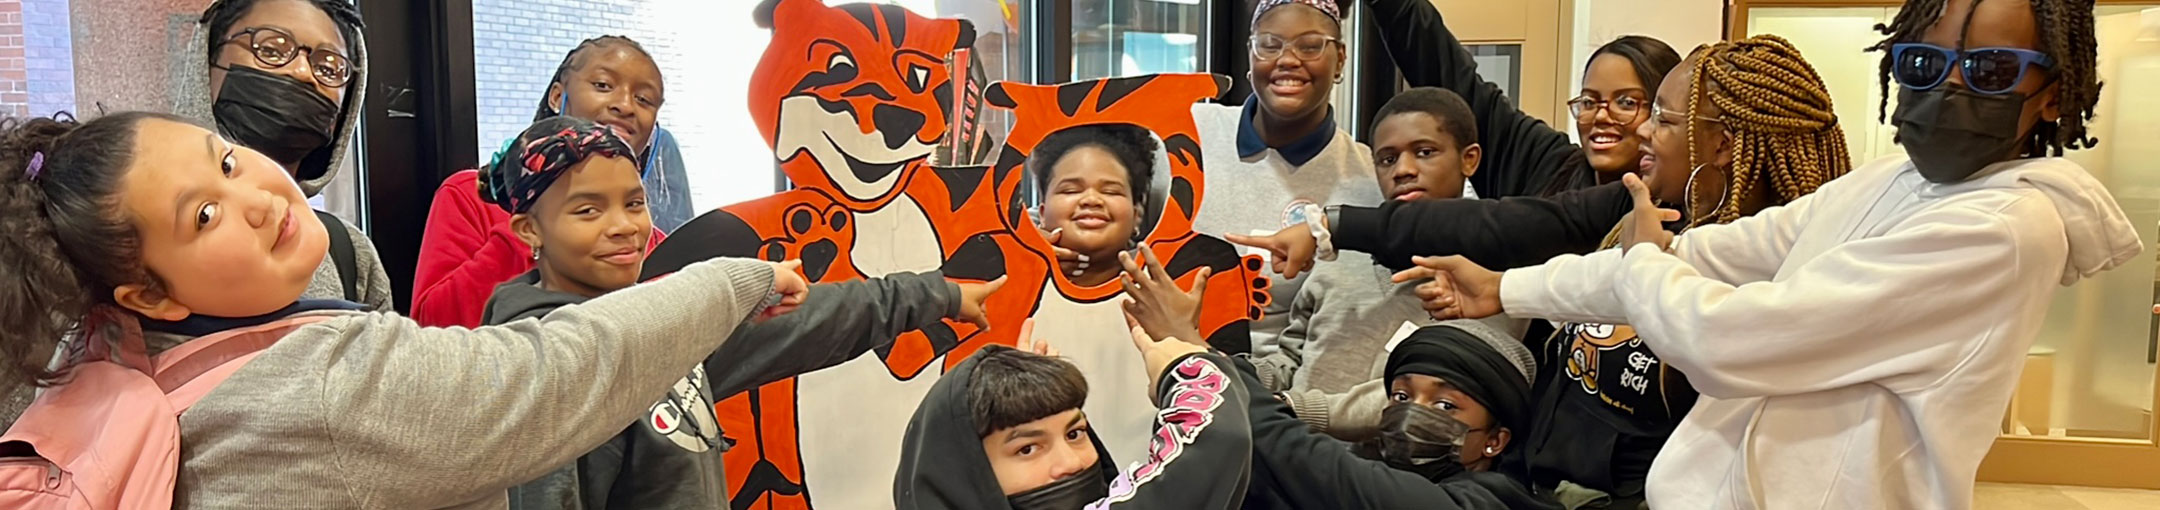 a group of people all pointing to the middle where someone is behind a tiger cutout